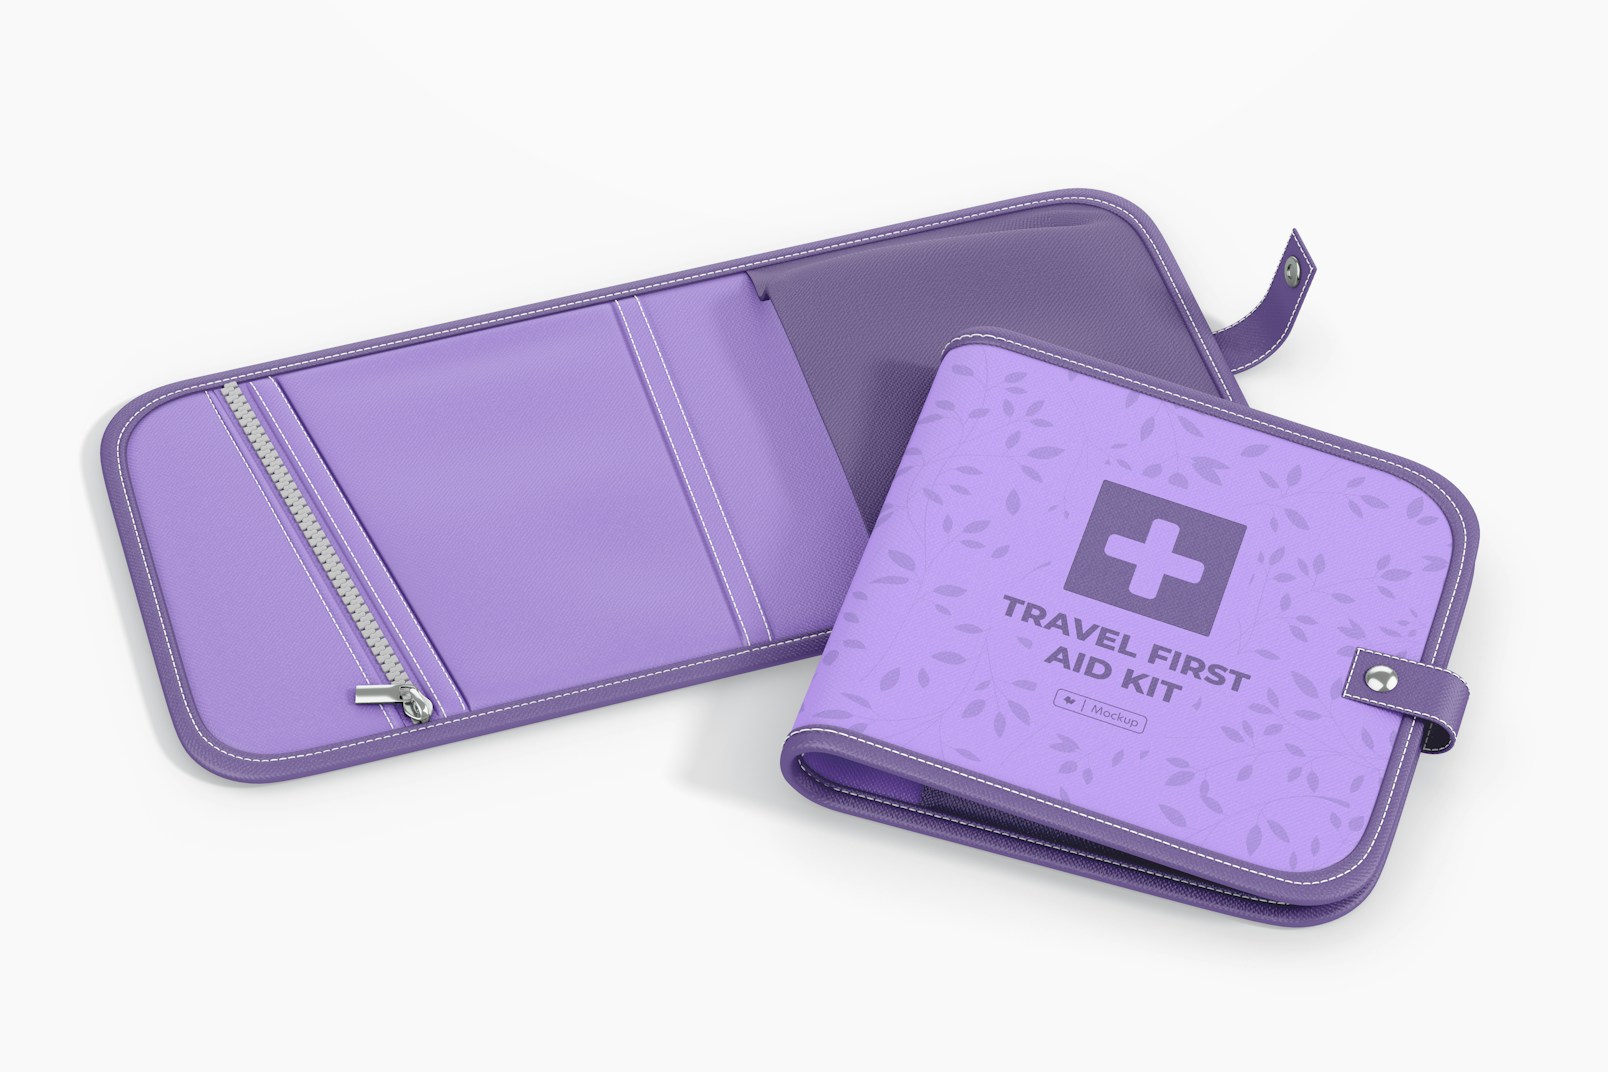 Travel First Aid Kit Mockup, Opened and Closed